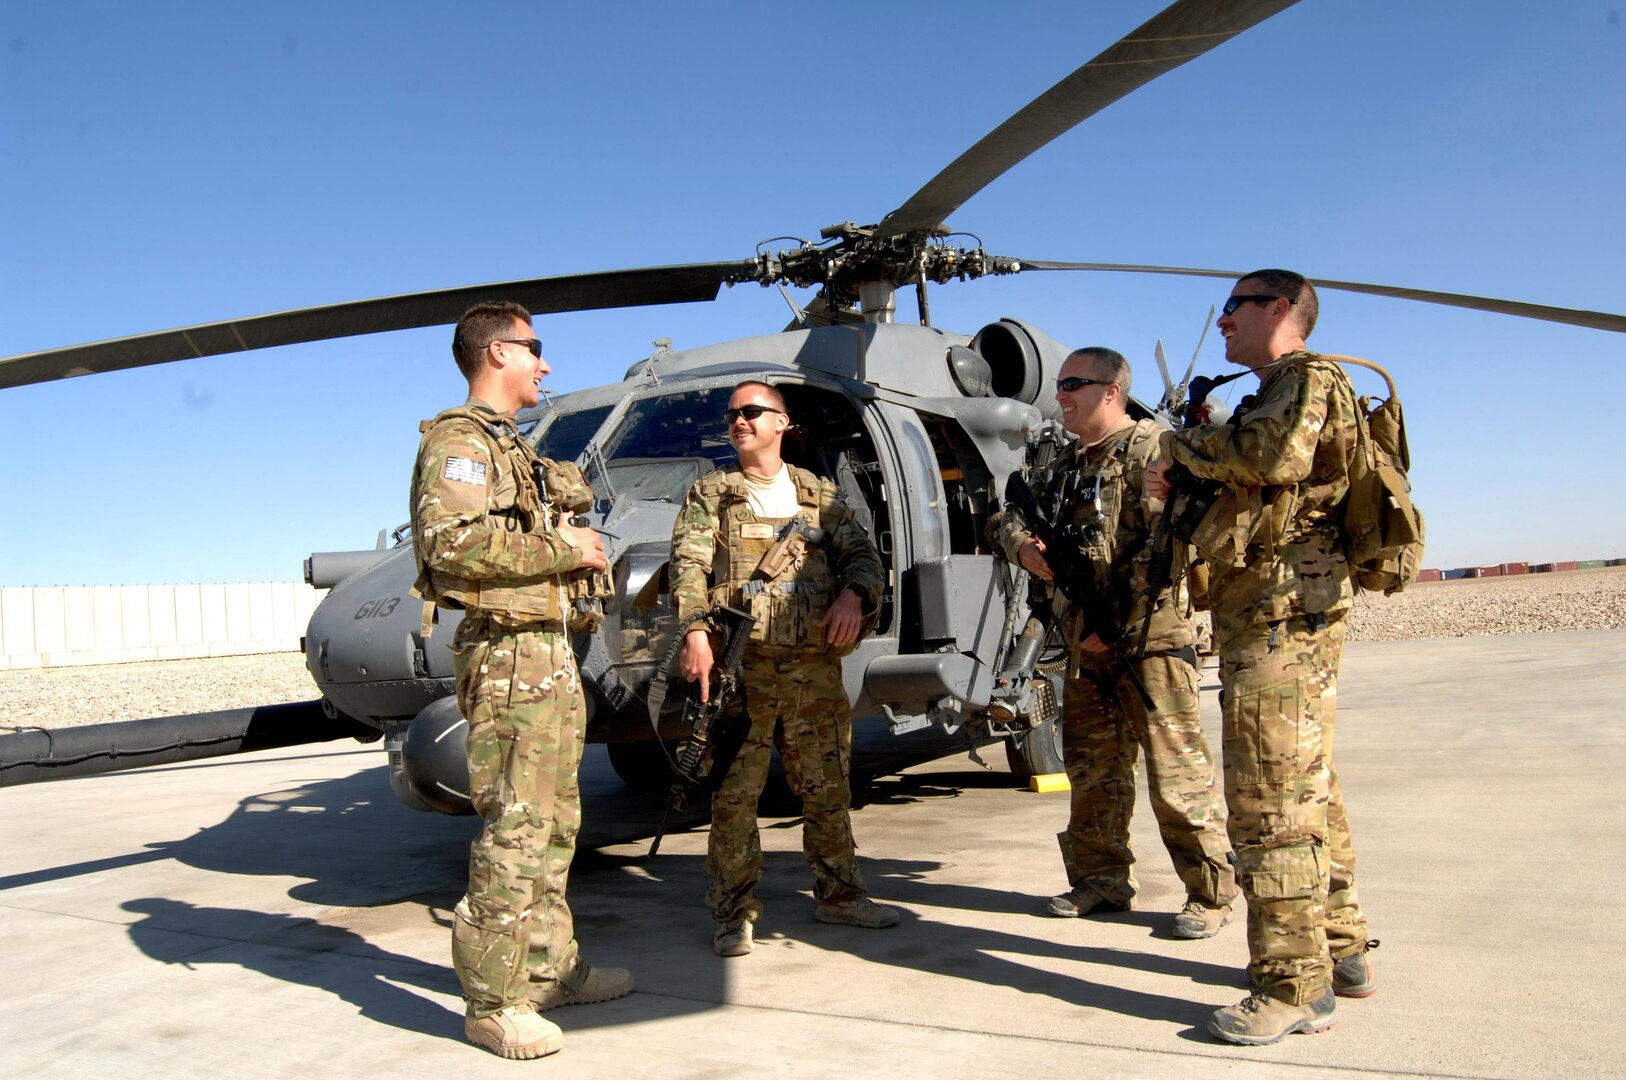 From left, Capt. Shaun Cullen, Capt. Tripp Zanetis, Tech. Sgt. Jim Denniston and Tech. Sgt. Erick Pound are all members of the 101st Rescue Squadron, New York Air National Guard, currently assigned to the 26th Expeditionary Rescue Squadron, take turns teasing each other.